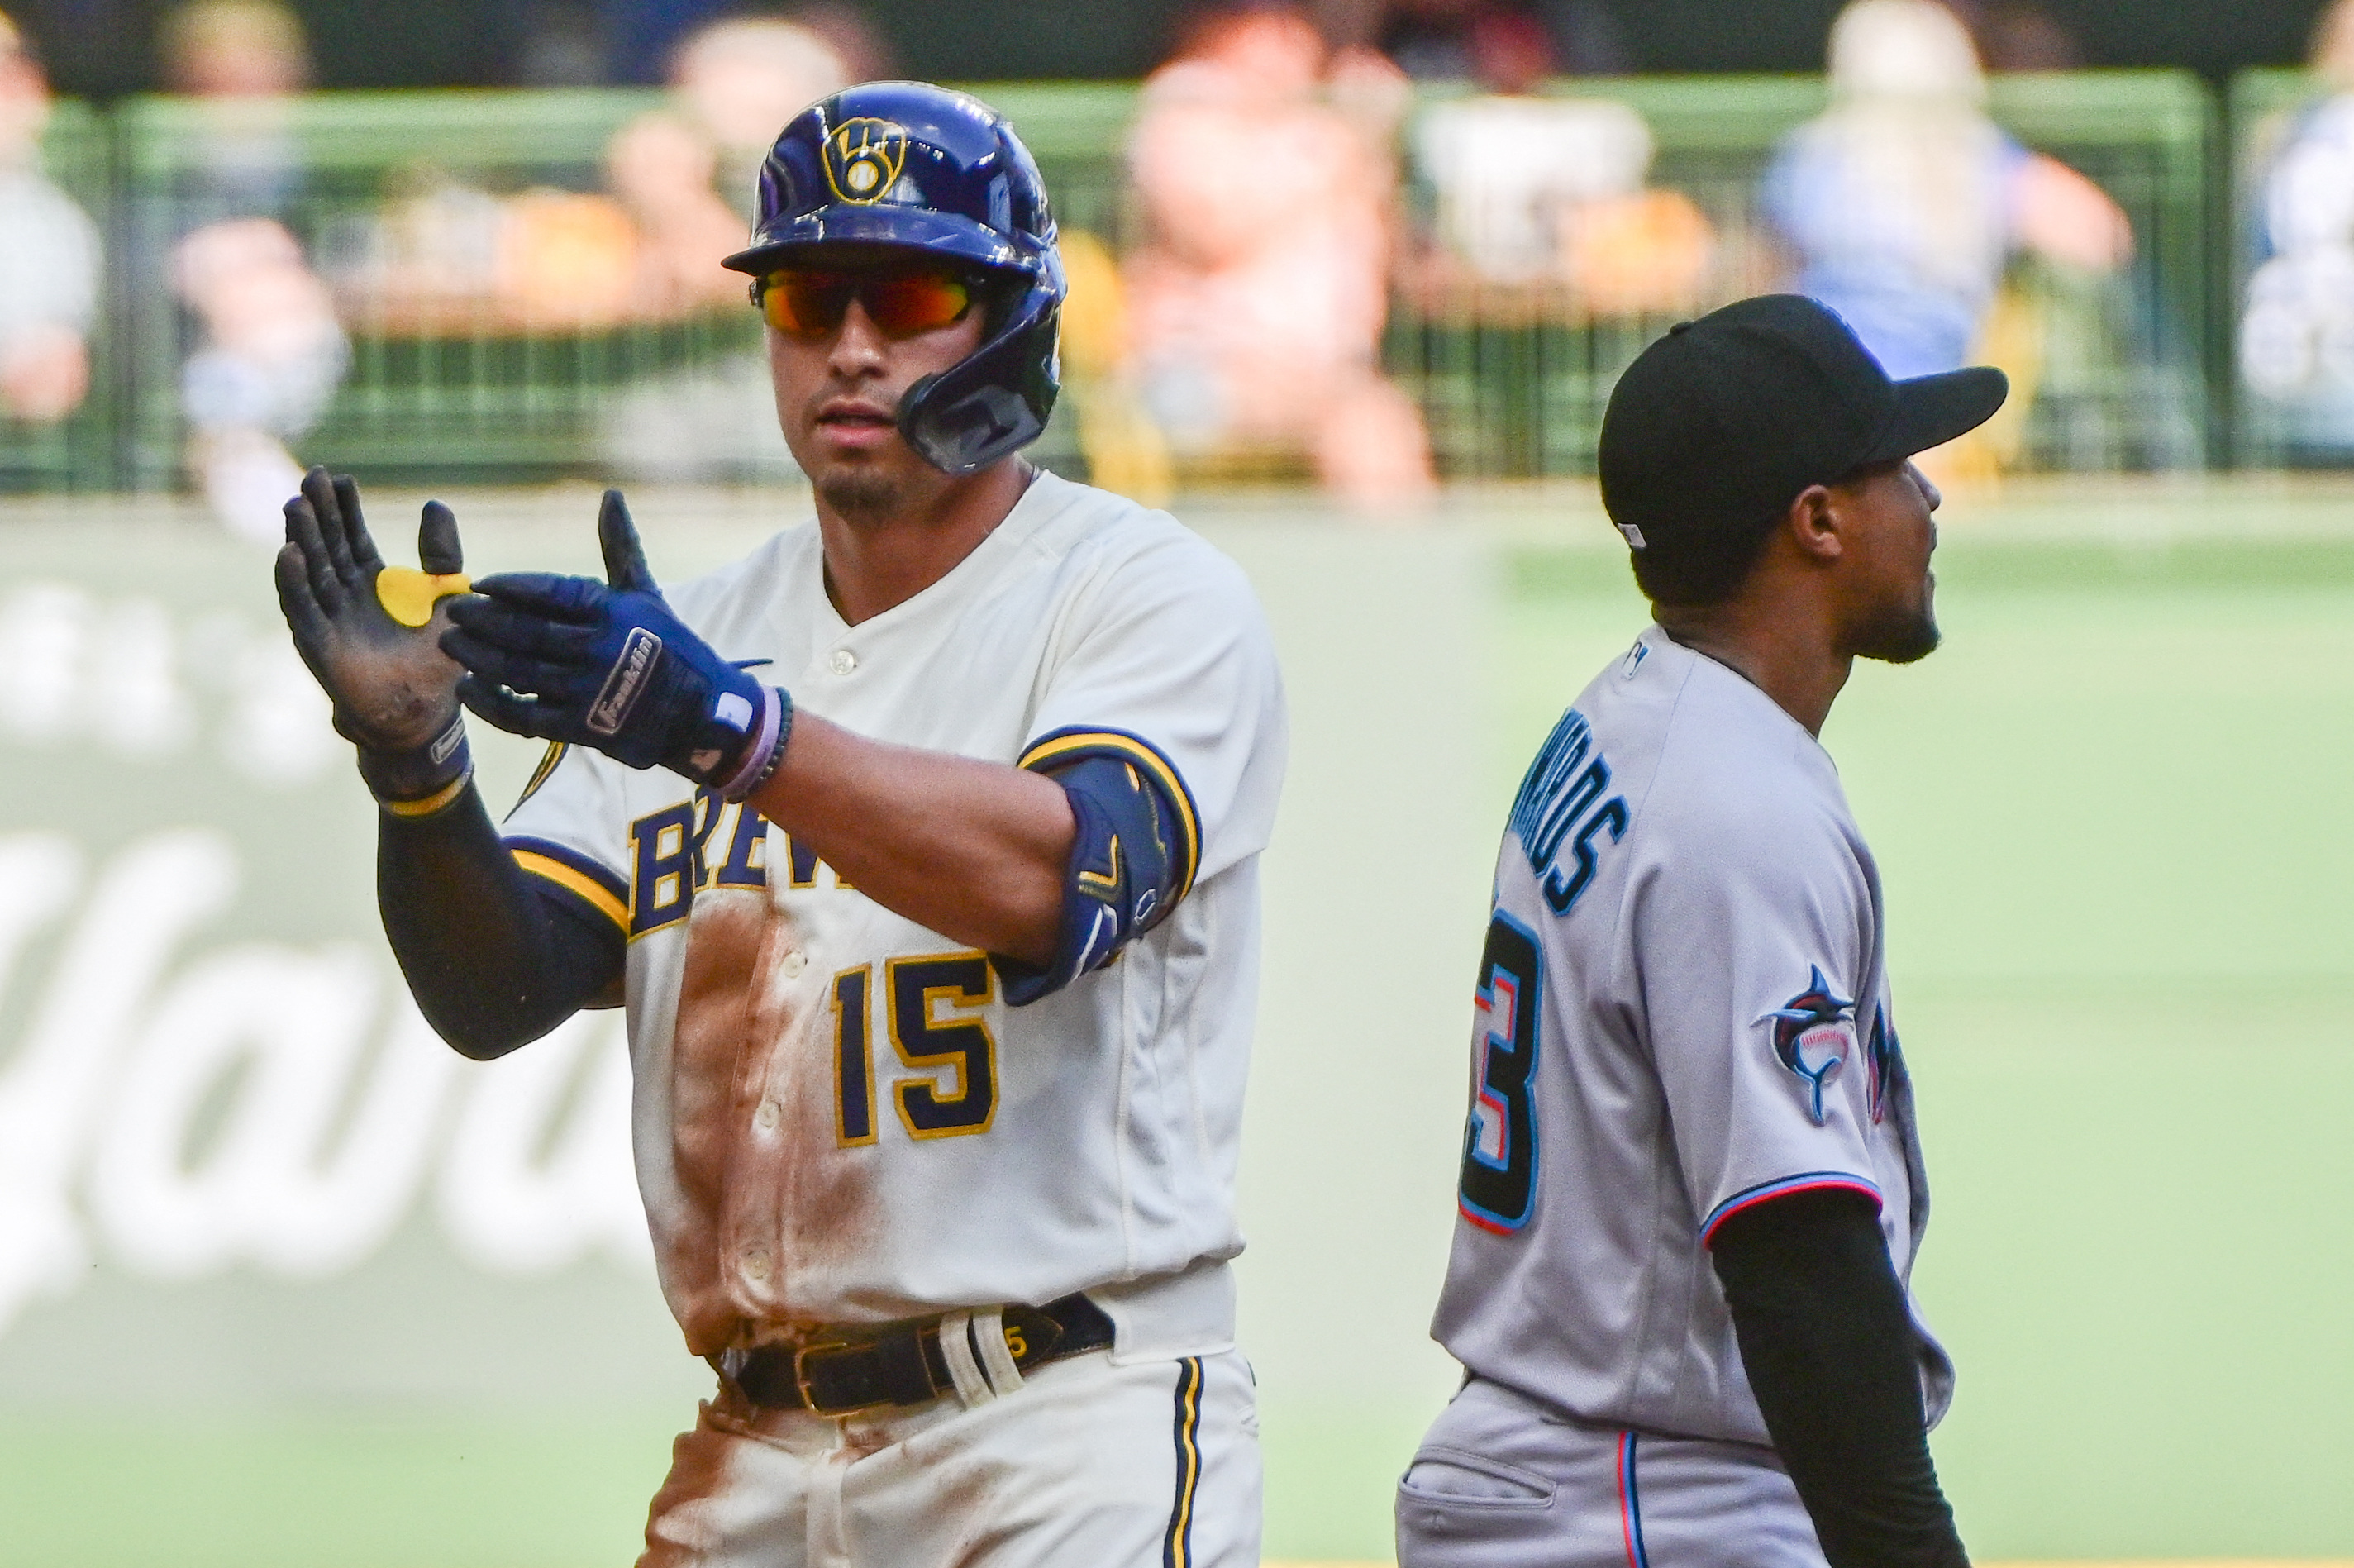 Tyrone Taylor shines as Brewers grab a 4-2 win over Marlins